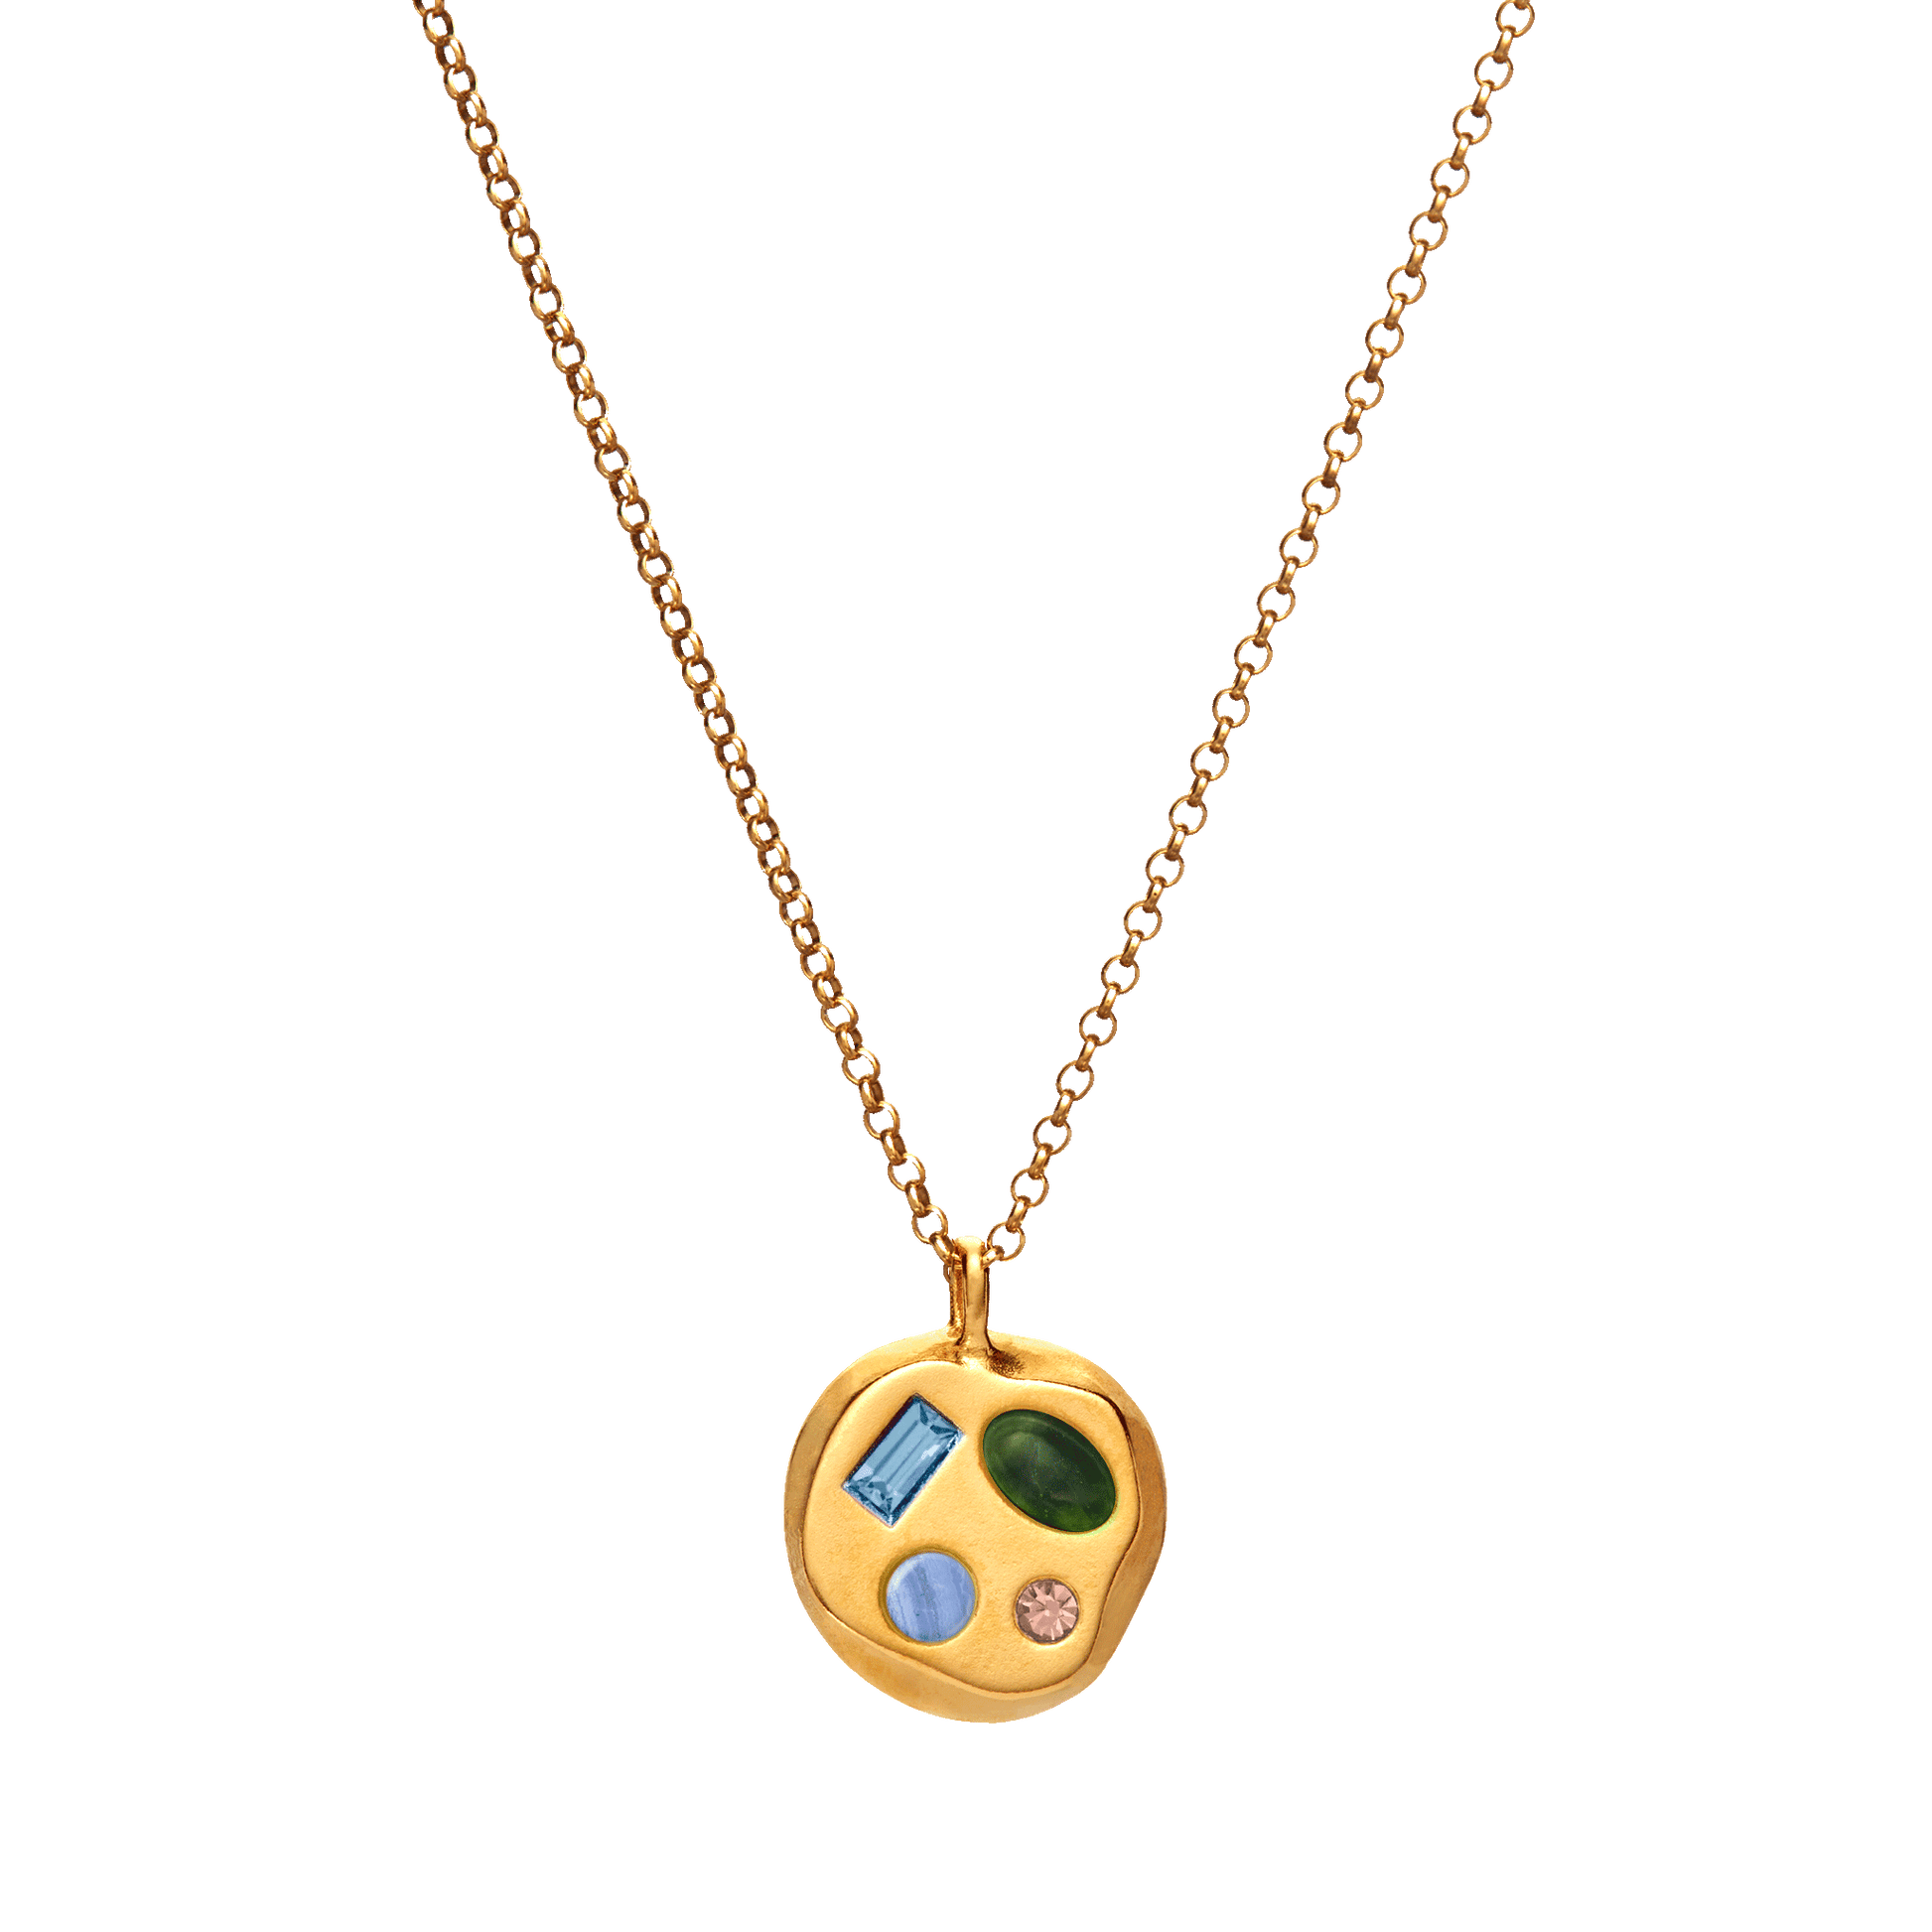 The March Ninth Pendant